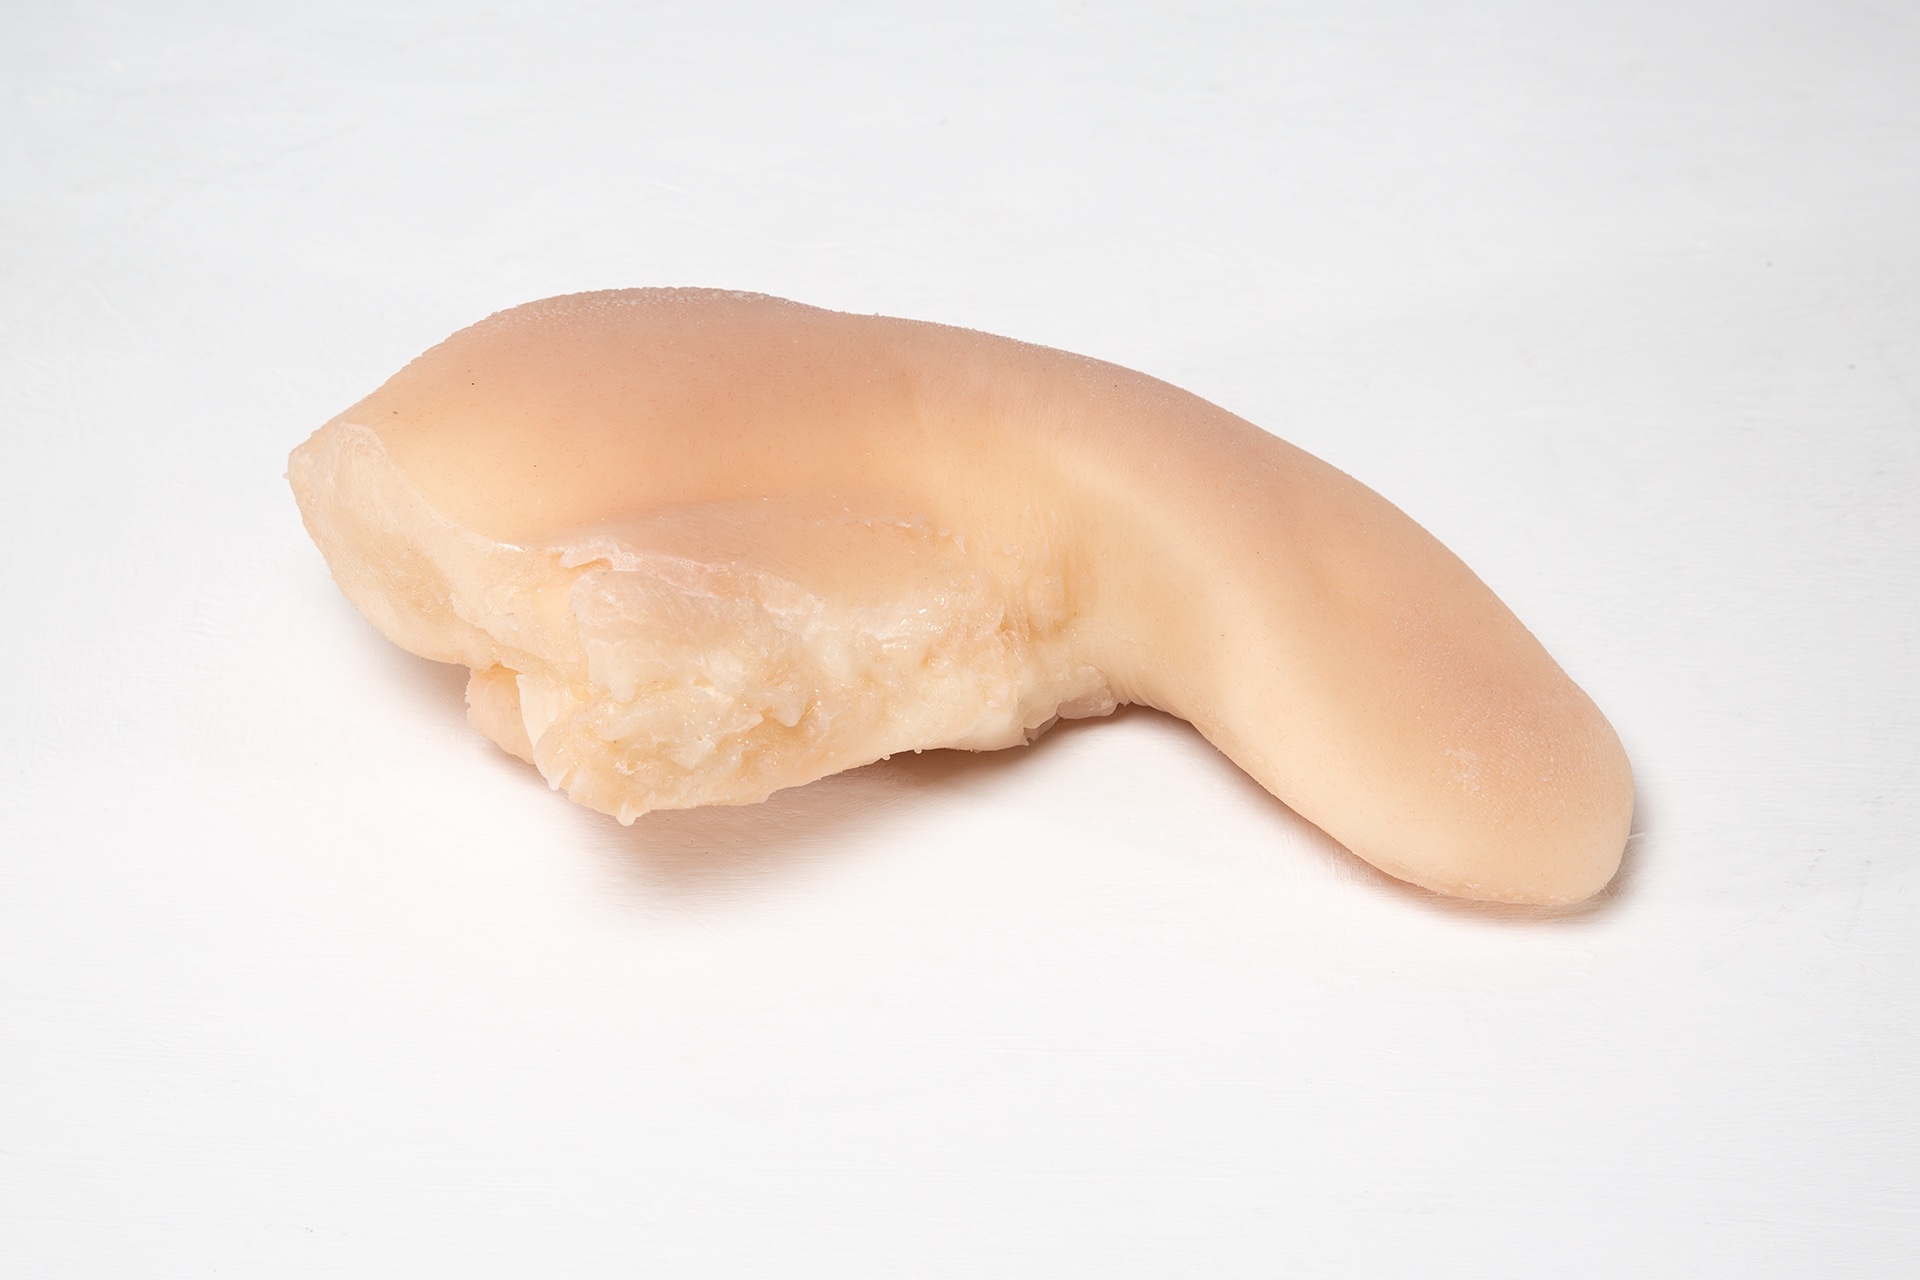 This is a life size cast of an ox tongue in a flesh coloured silicone, it appears phallic and squishy to the touch.